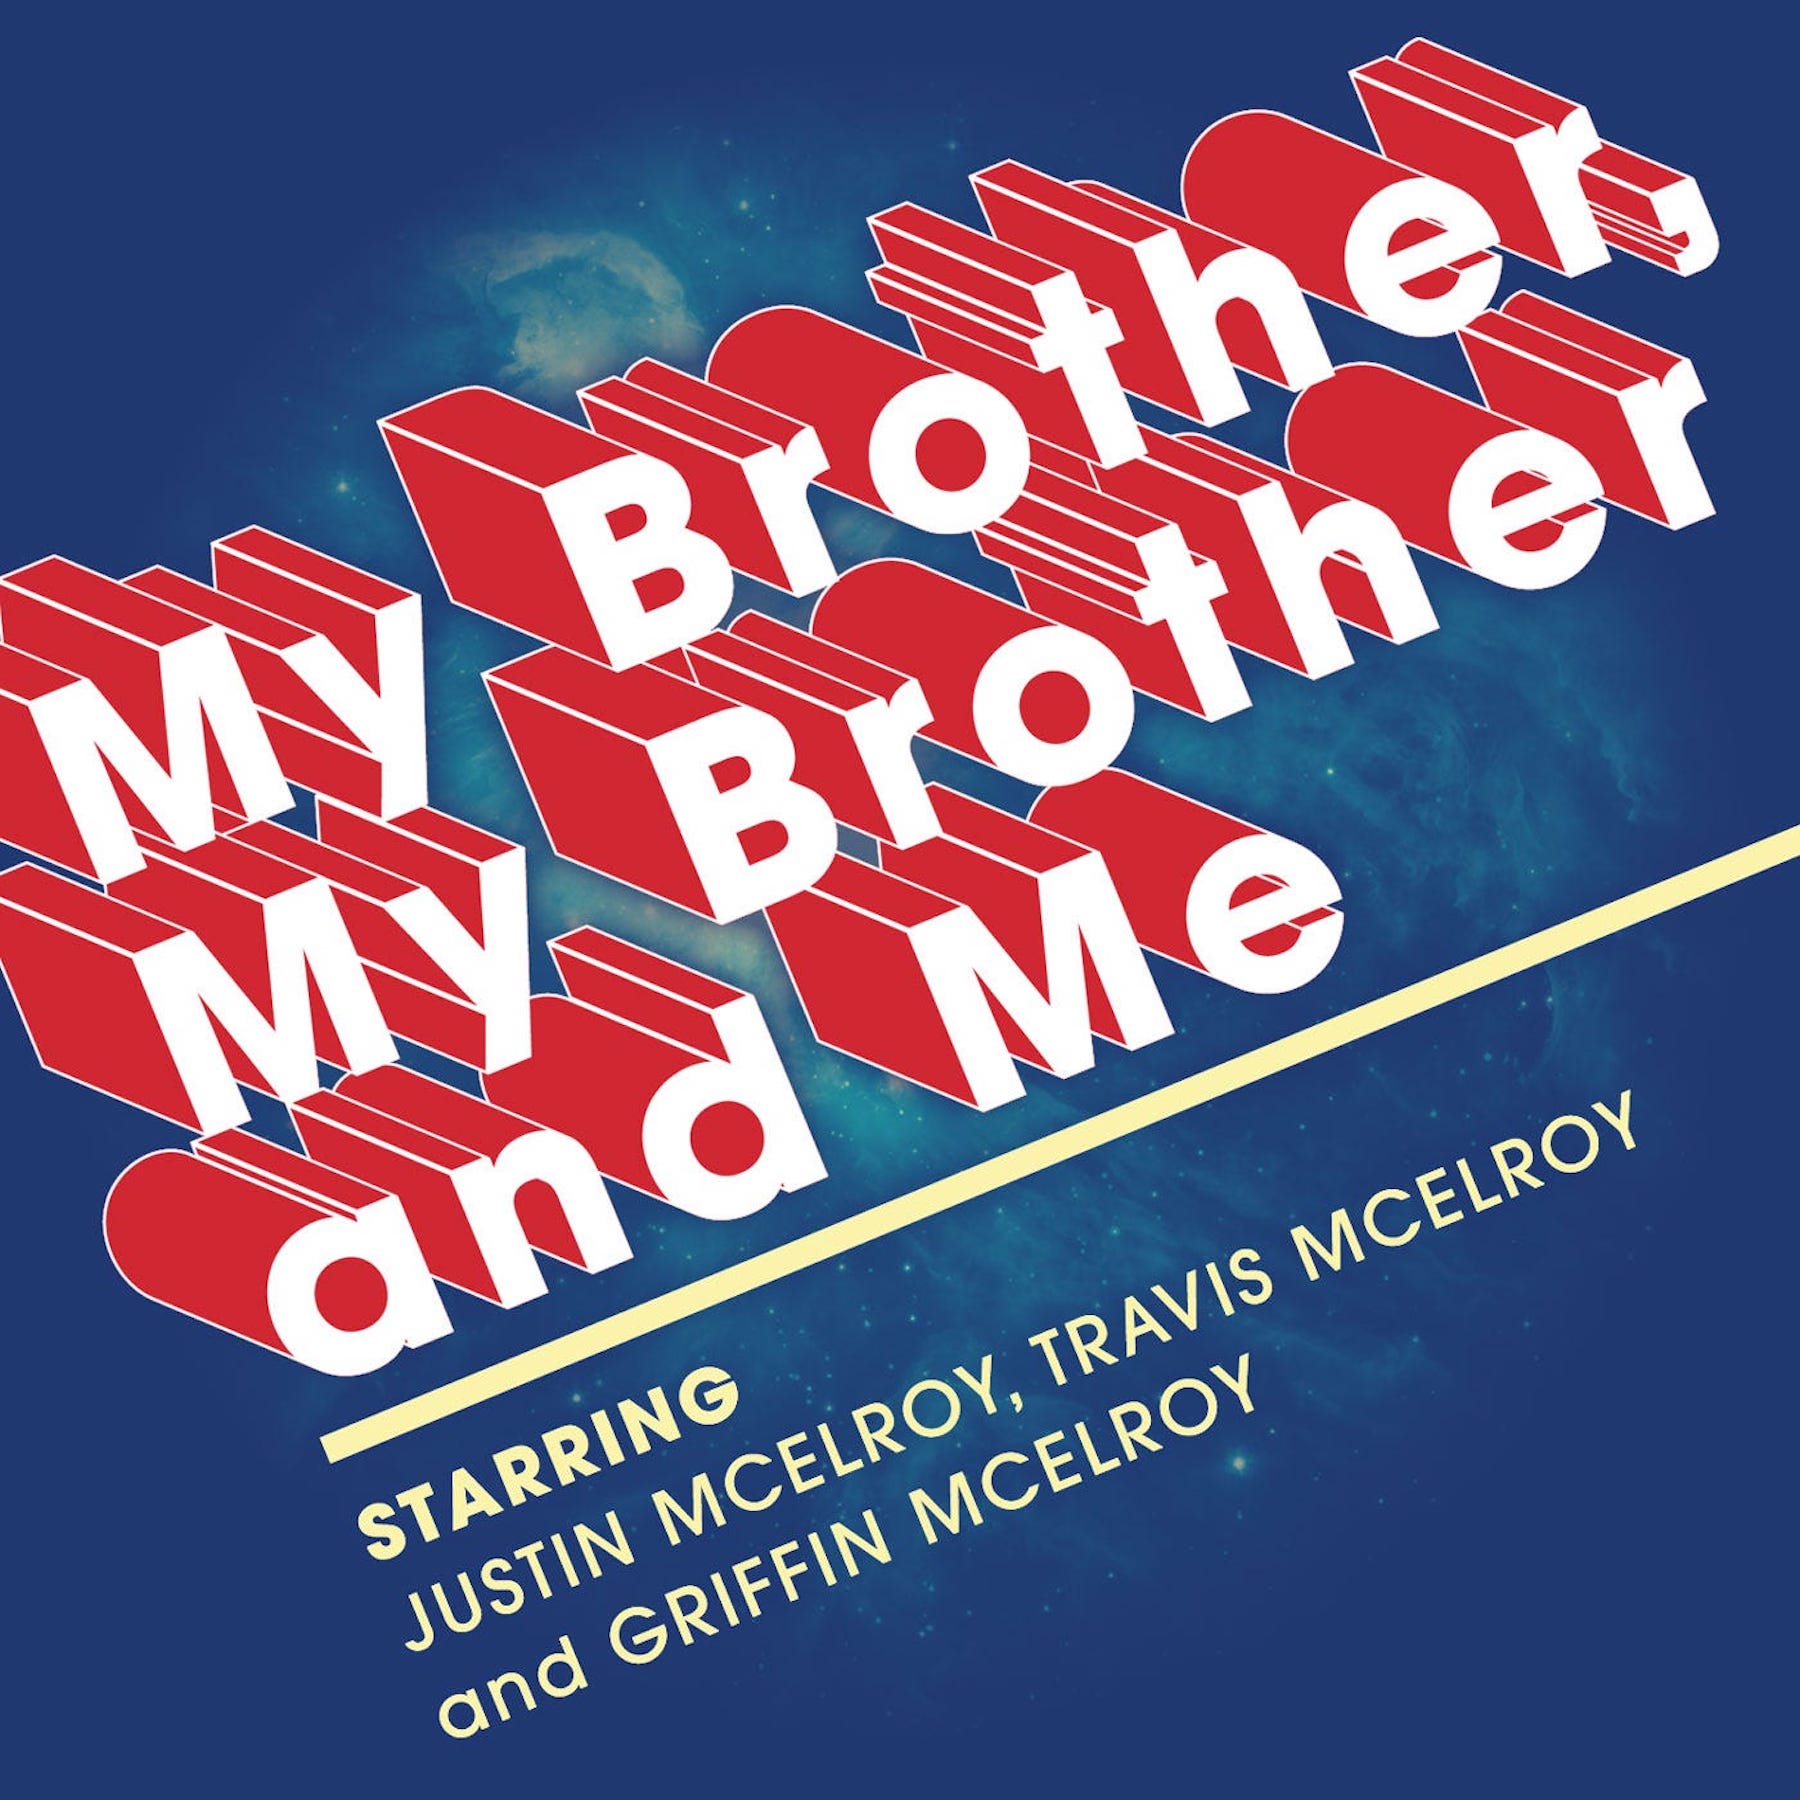 My Brother, My Brother, and Me artwork with 3D red and white text against blue background.